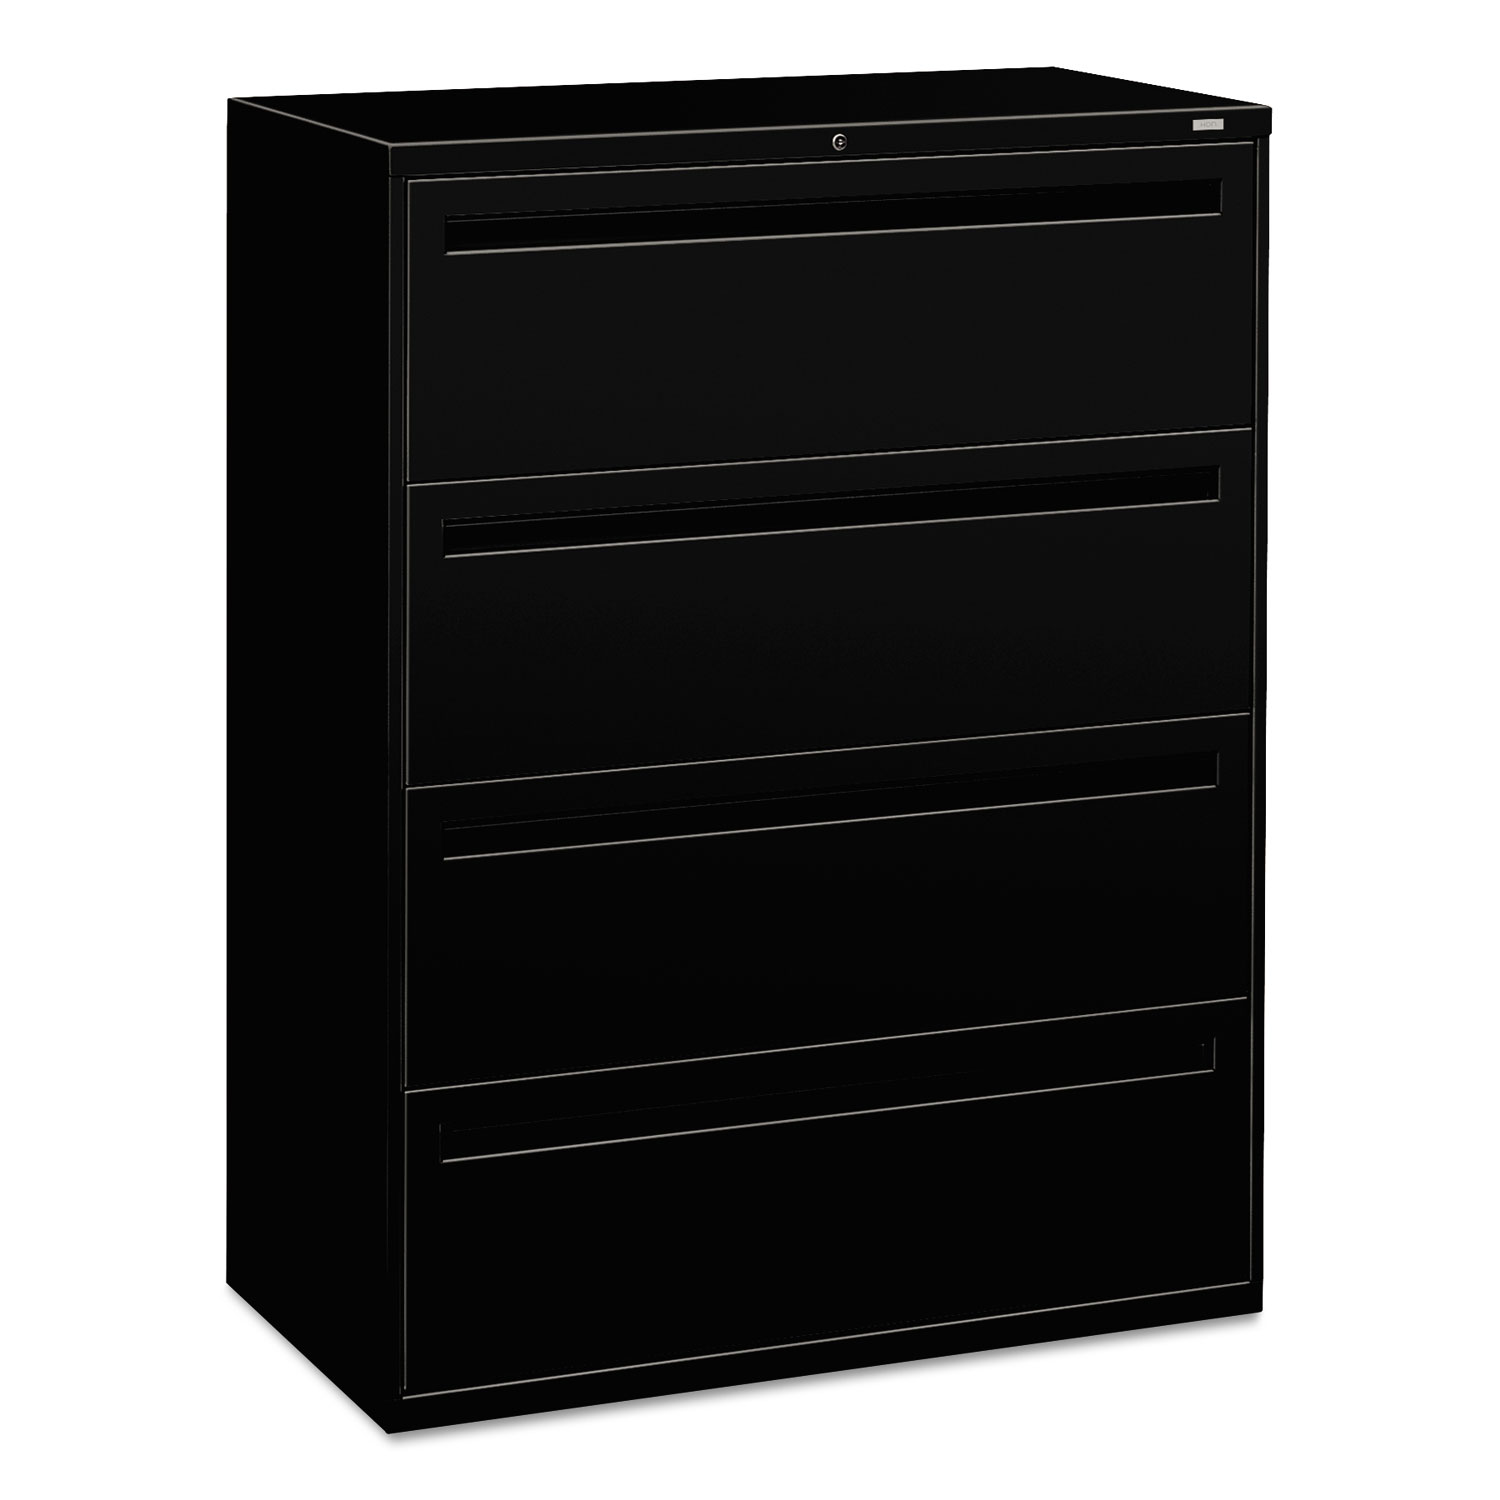 700 Series Four-Drawer Lateral File, 42w x 18d x 52 1/2h, Black